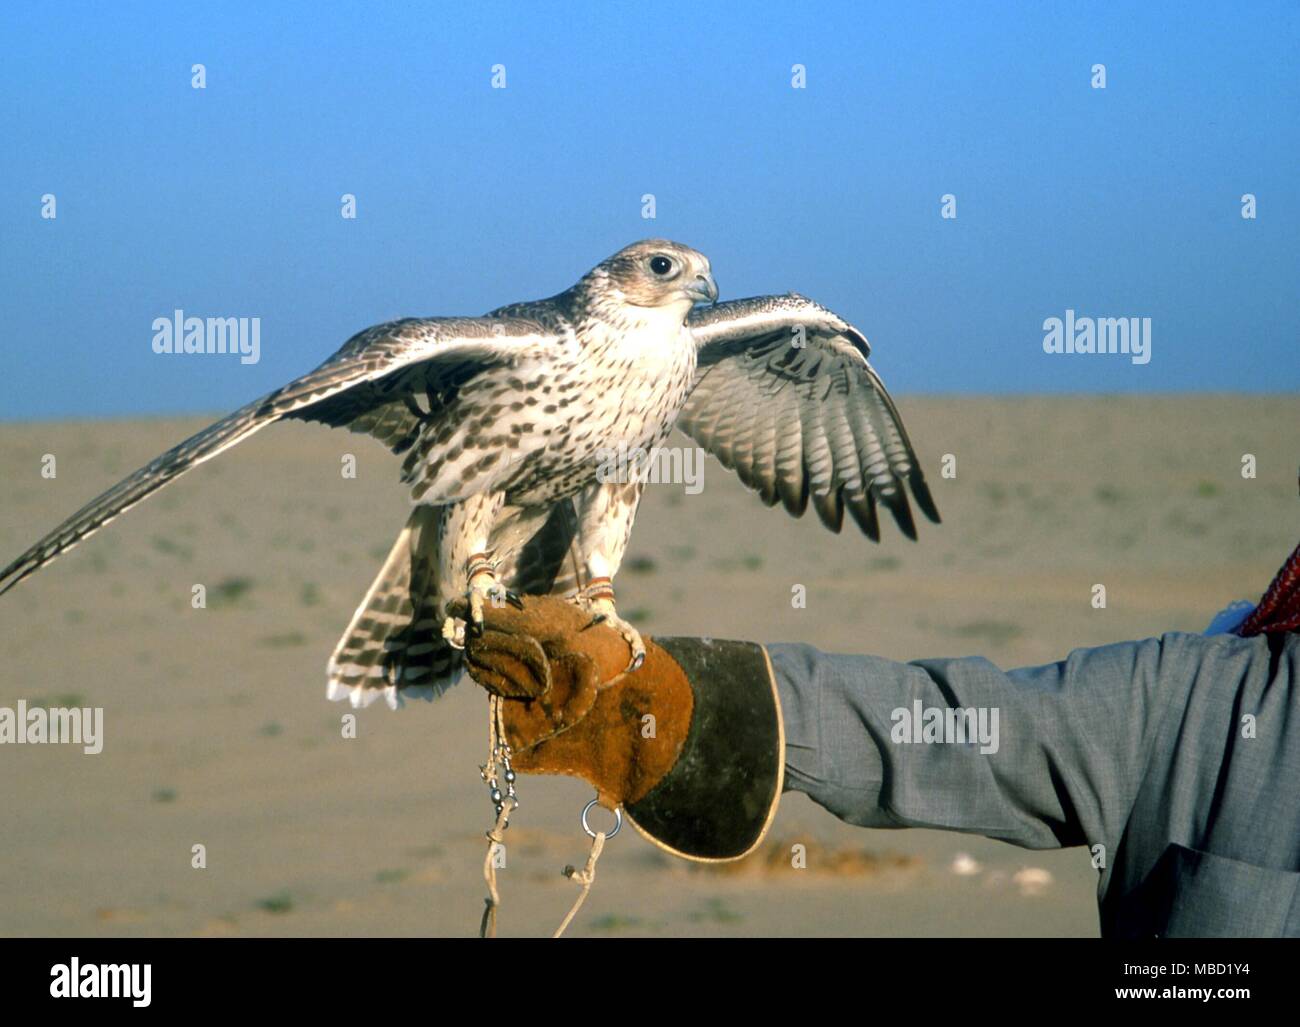 Falcons in the Kuwait desert, used for hunting desert creatures. Stock Photo